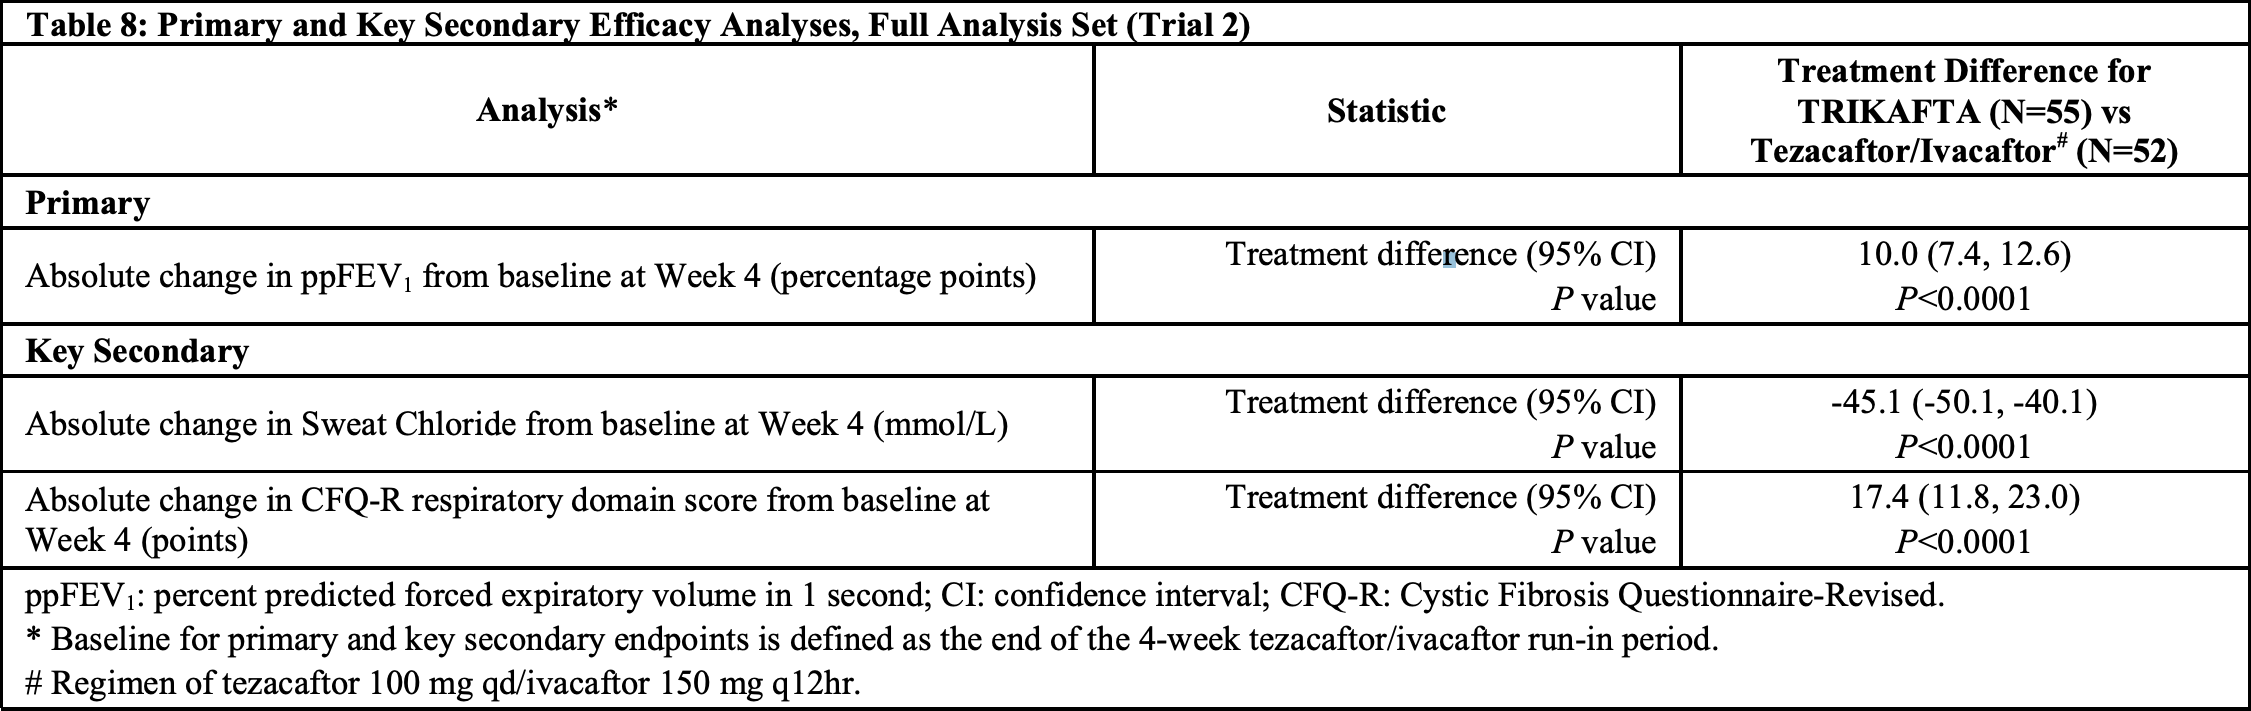 nct03525548 results 01 - Trikafta/Kaftrio: World’s First Triple Therapy for Cystic Fibrosis